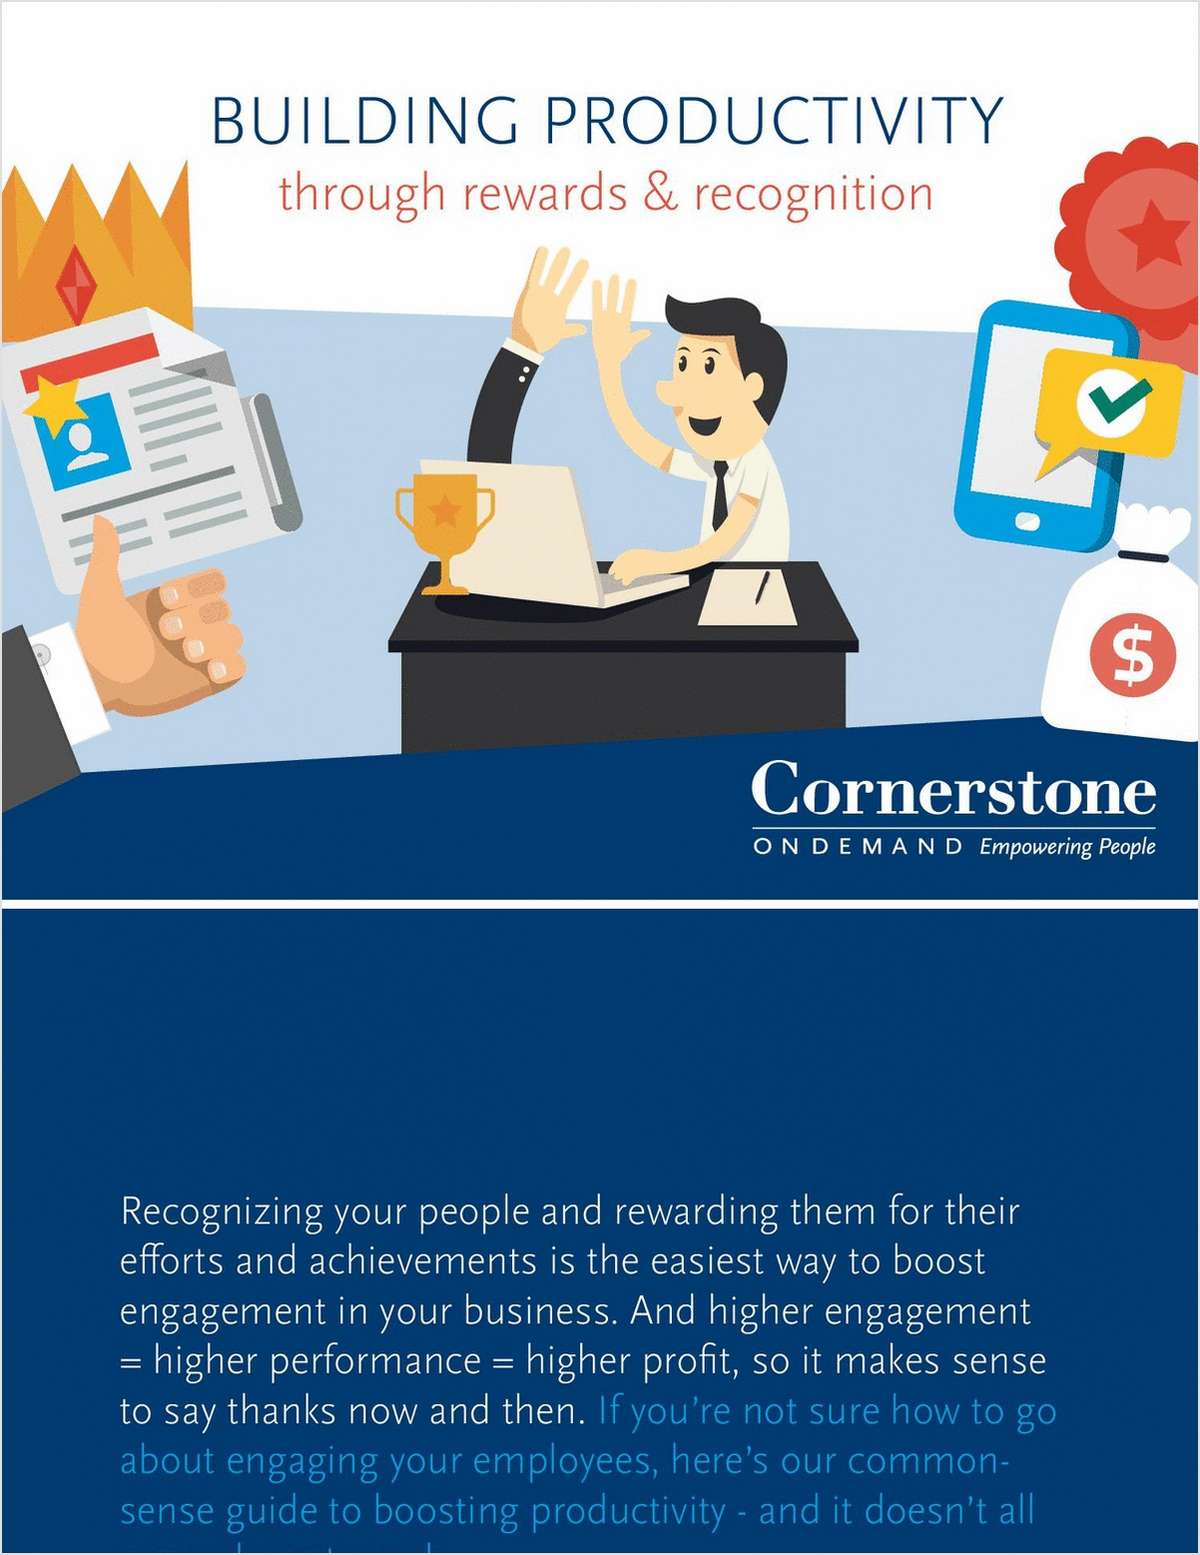 Building Productivity Through Rewards and Recognition